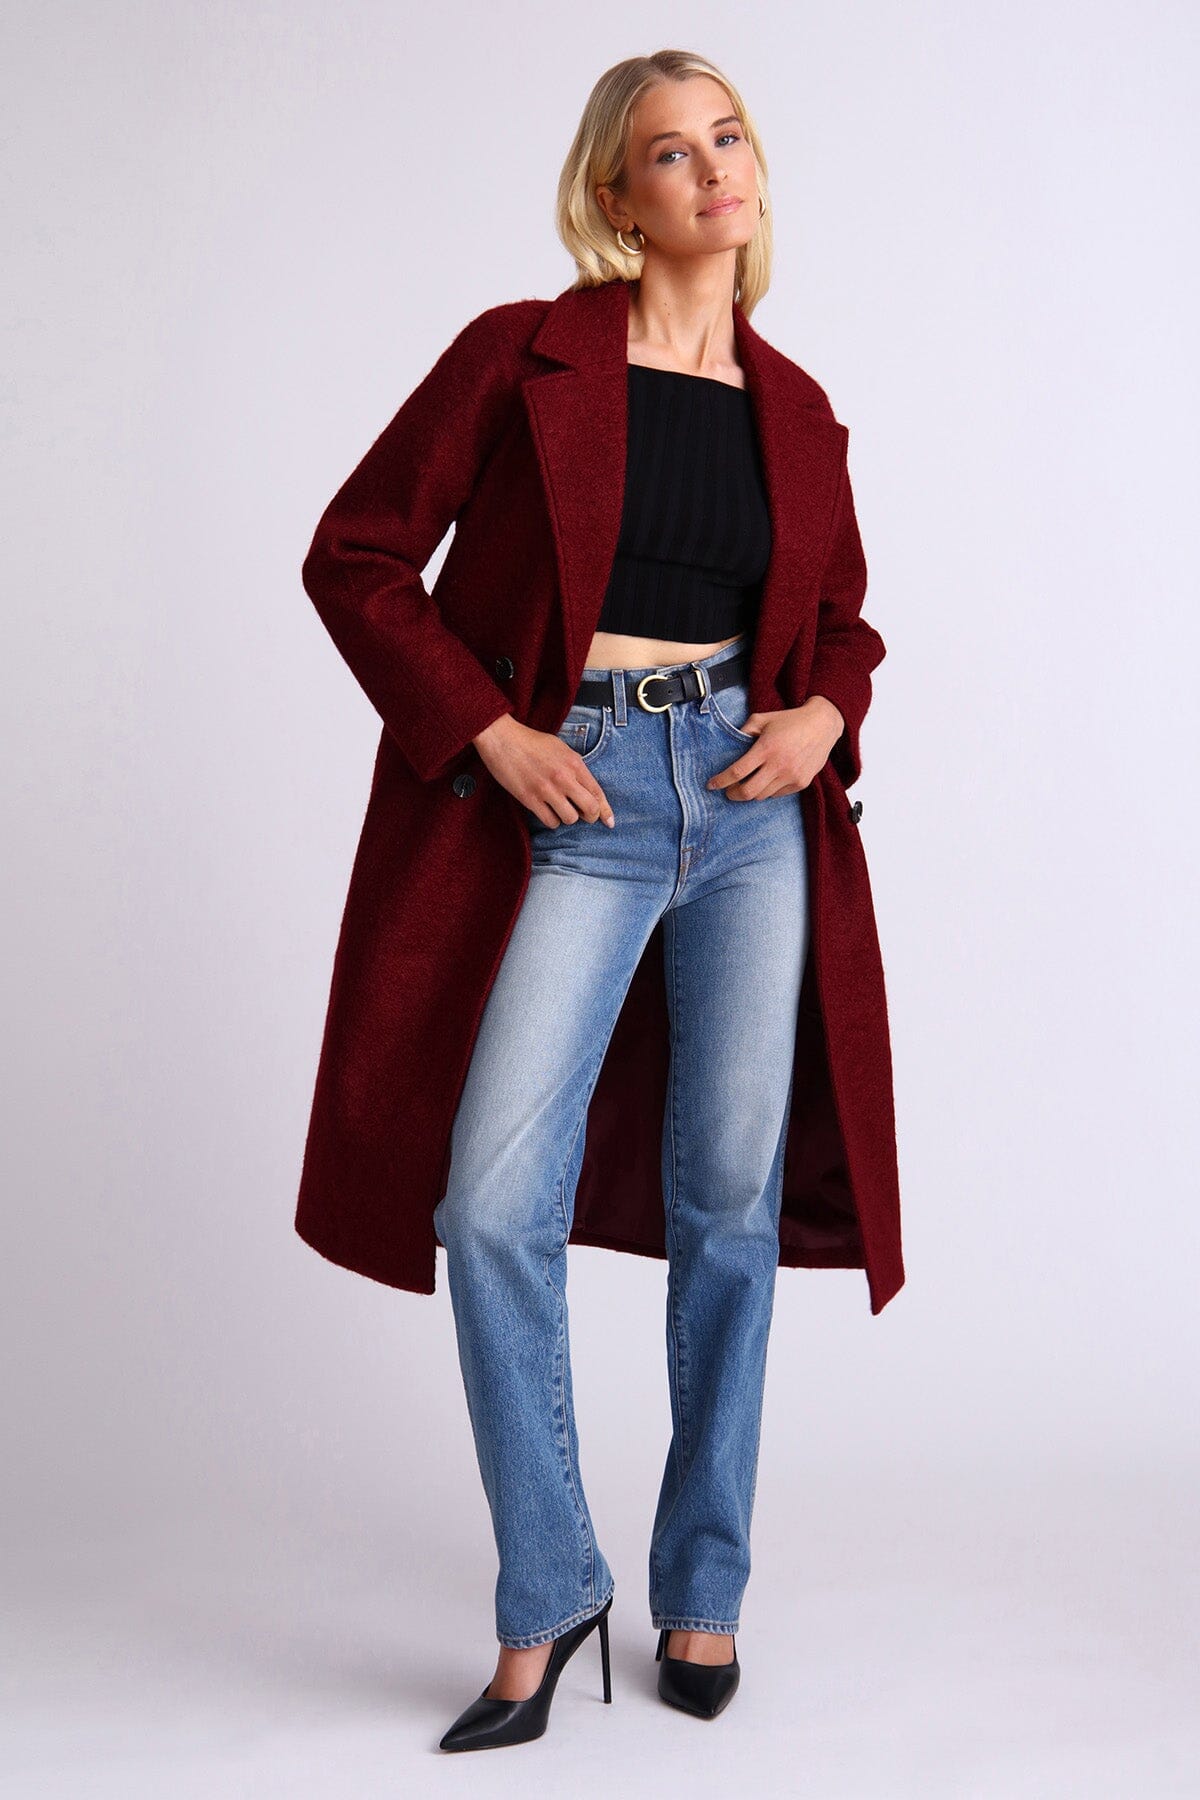 Dark red textured belted walker coat jacket - women's figure flattering casual to dressy coats outerwear for fall fashion trends